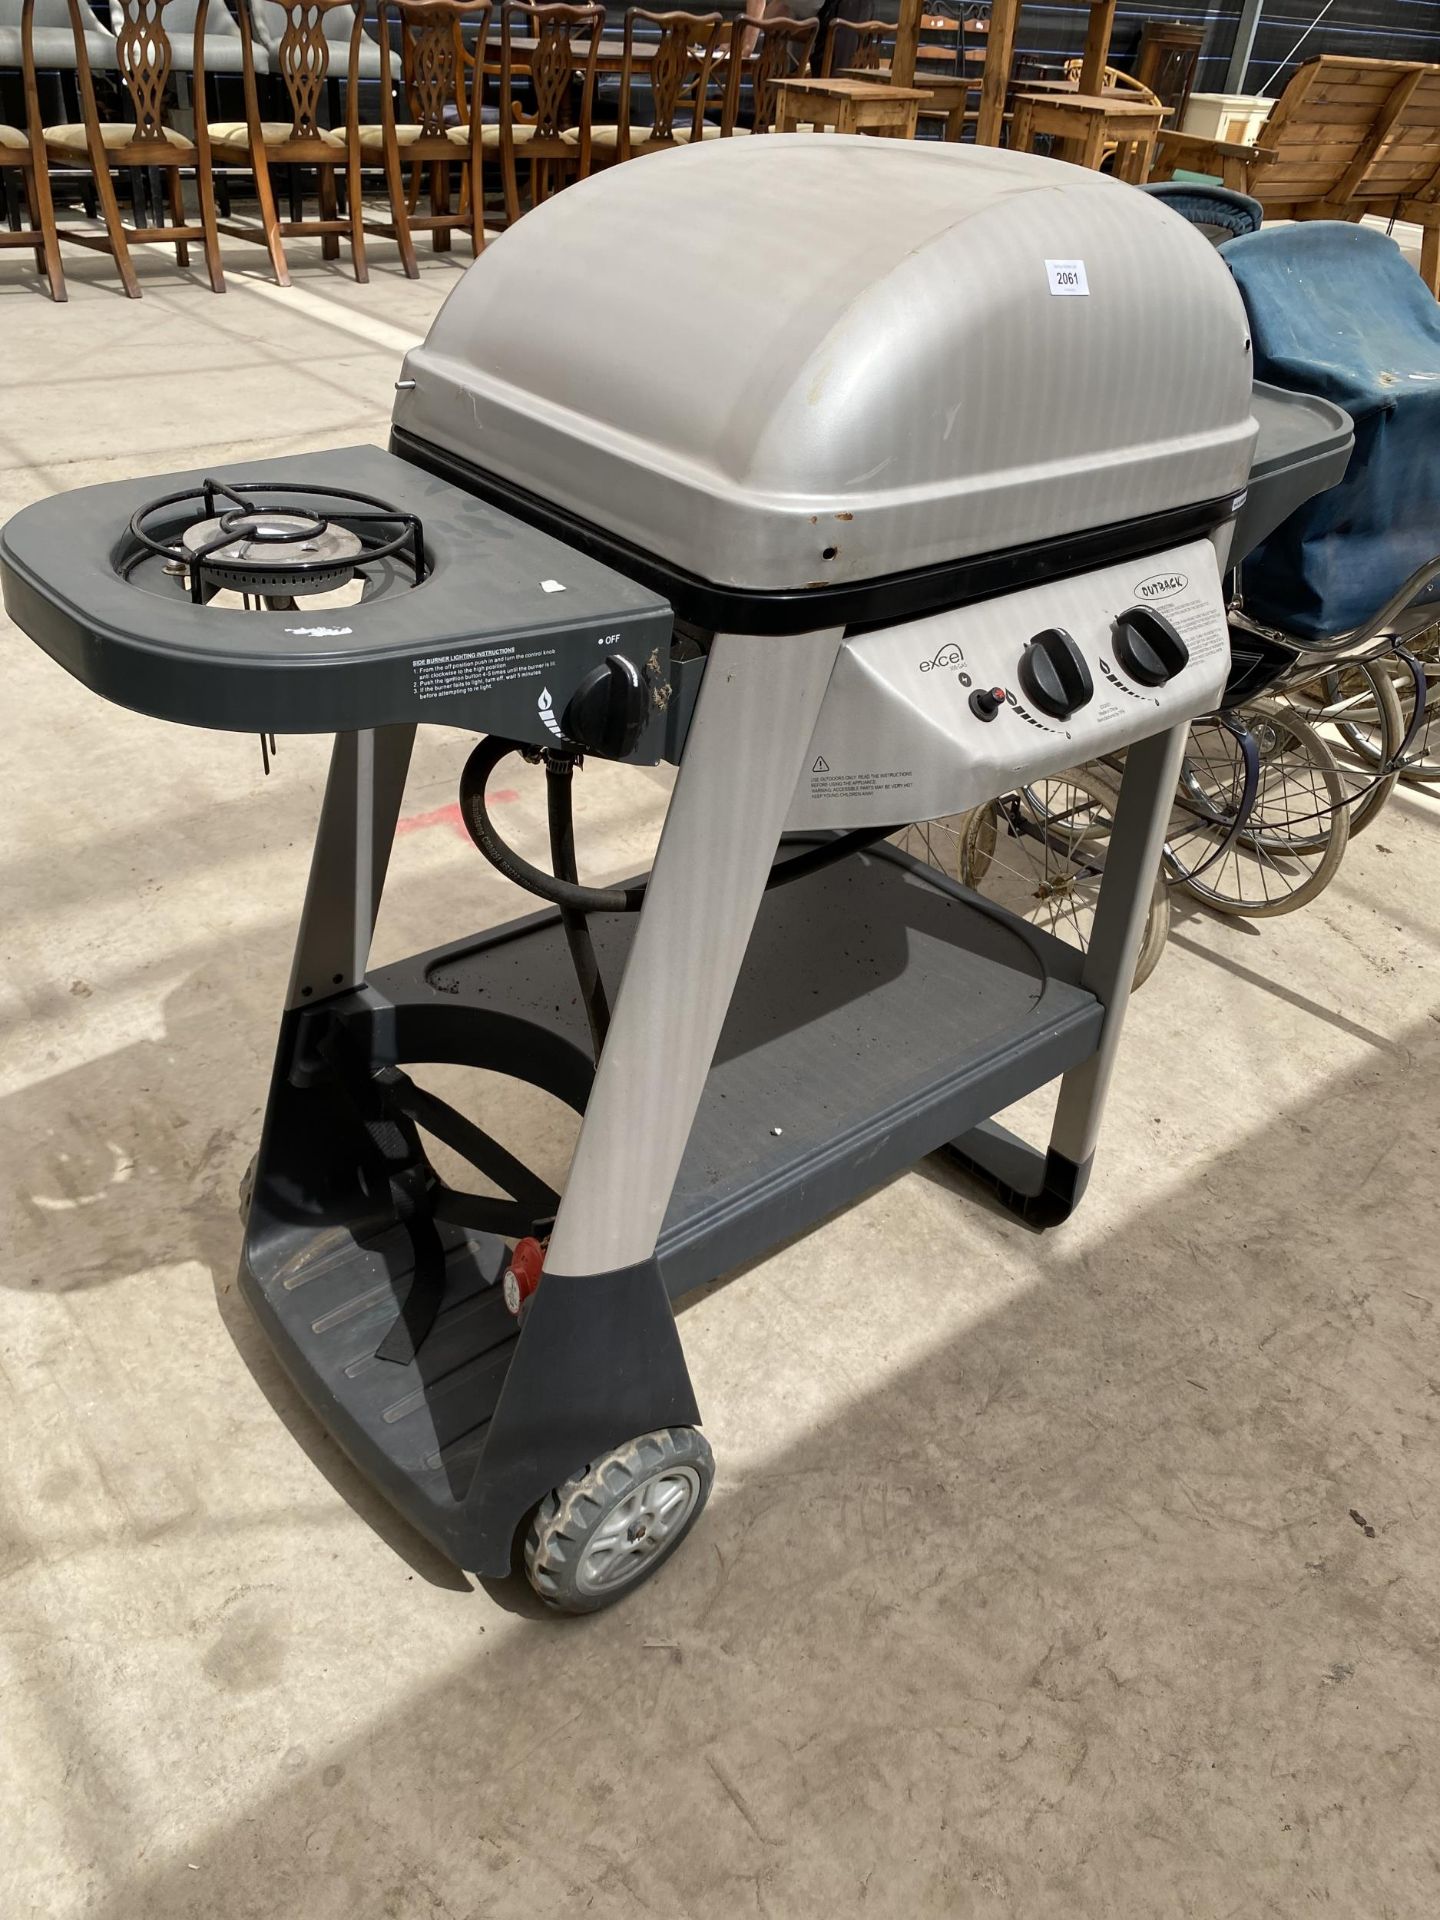 AN OUTBACK GAS BBQ FRAME (NO GRILL) - Image 2 of 6